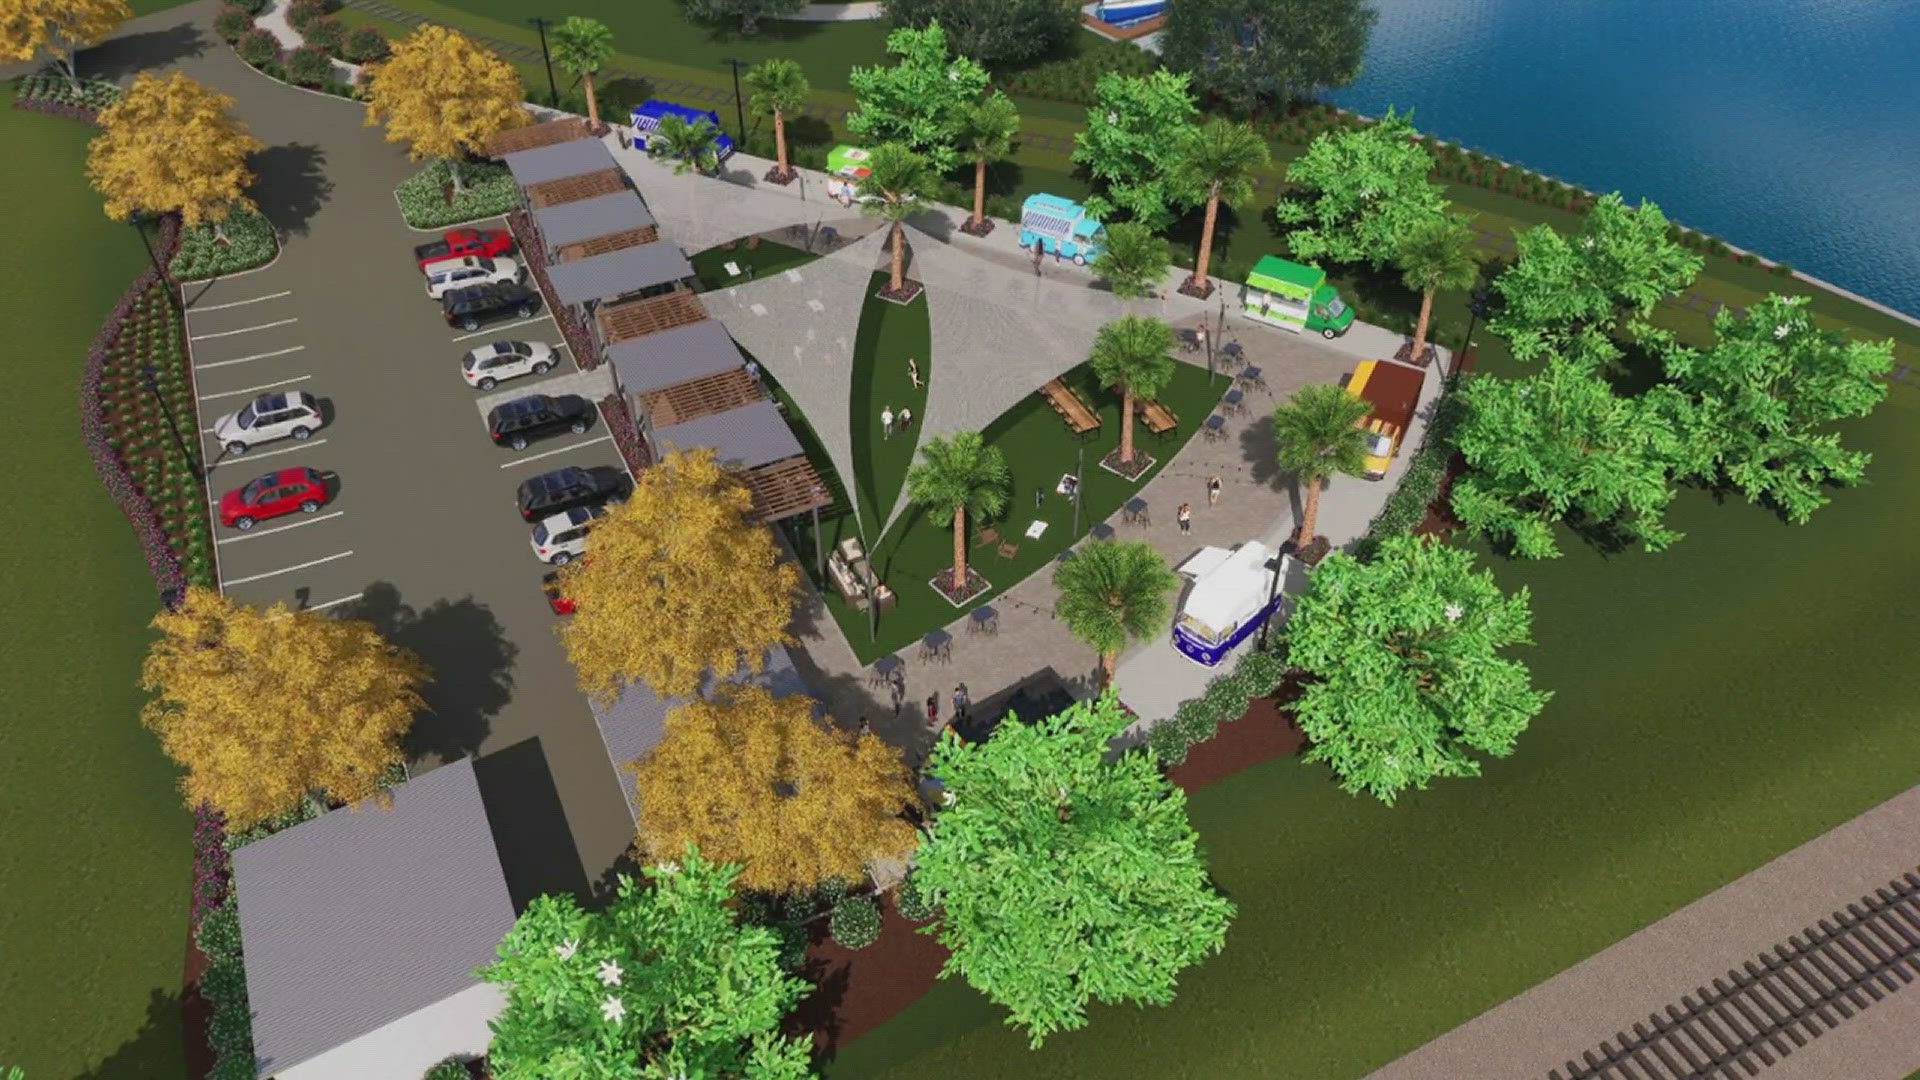 If the city approves the project, residents will soon be able to enjoy a new food truck park.